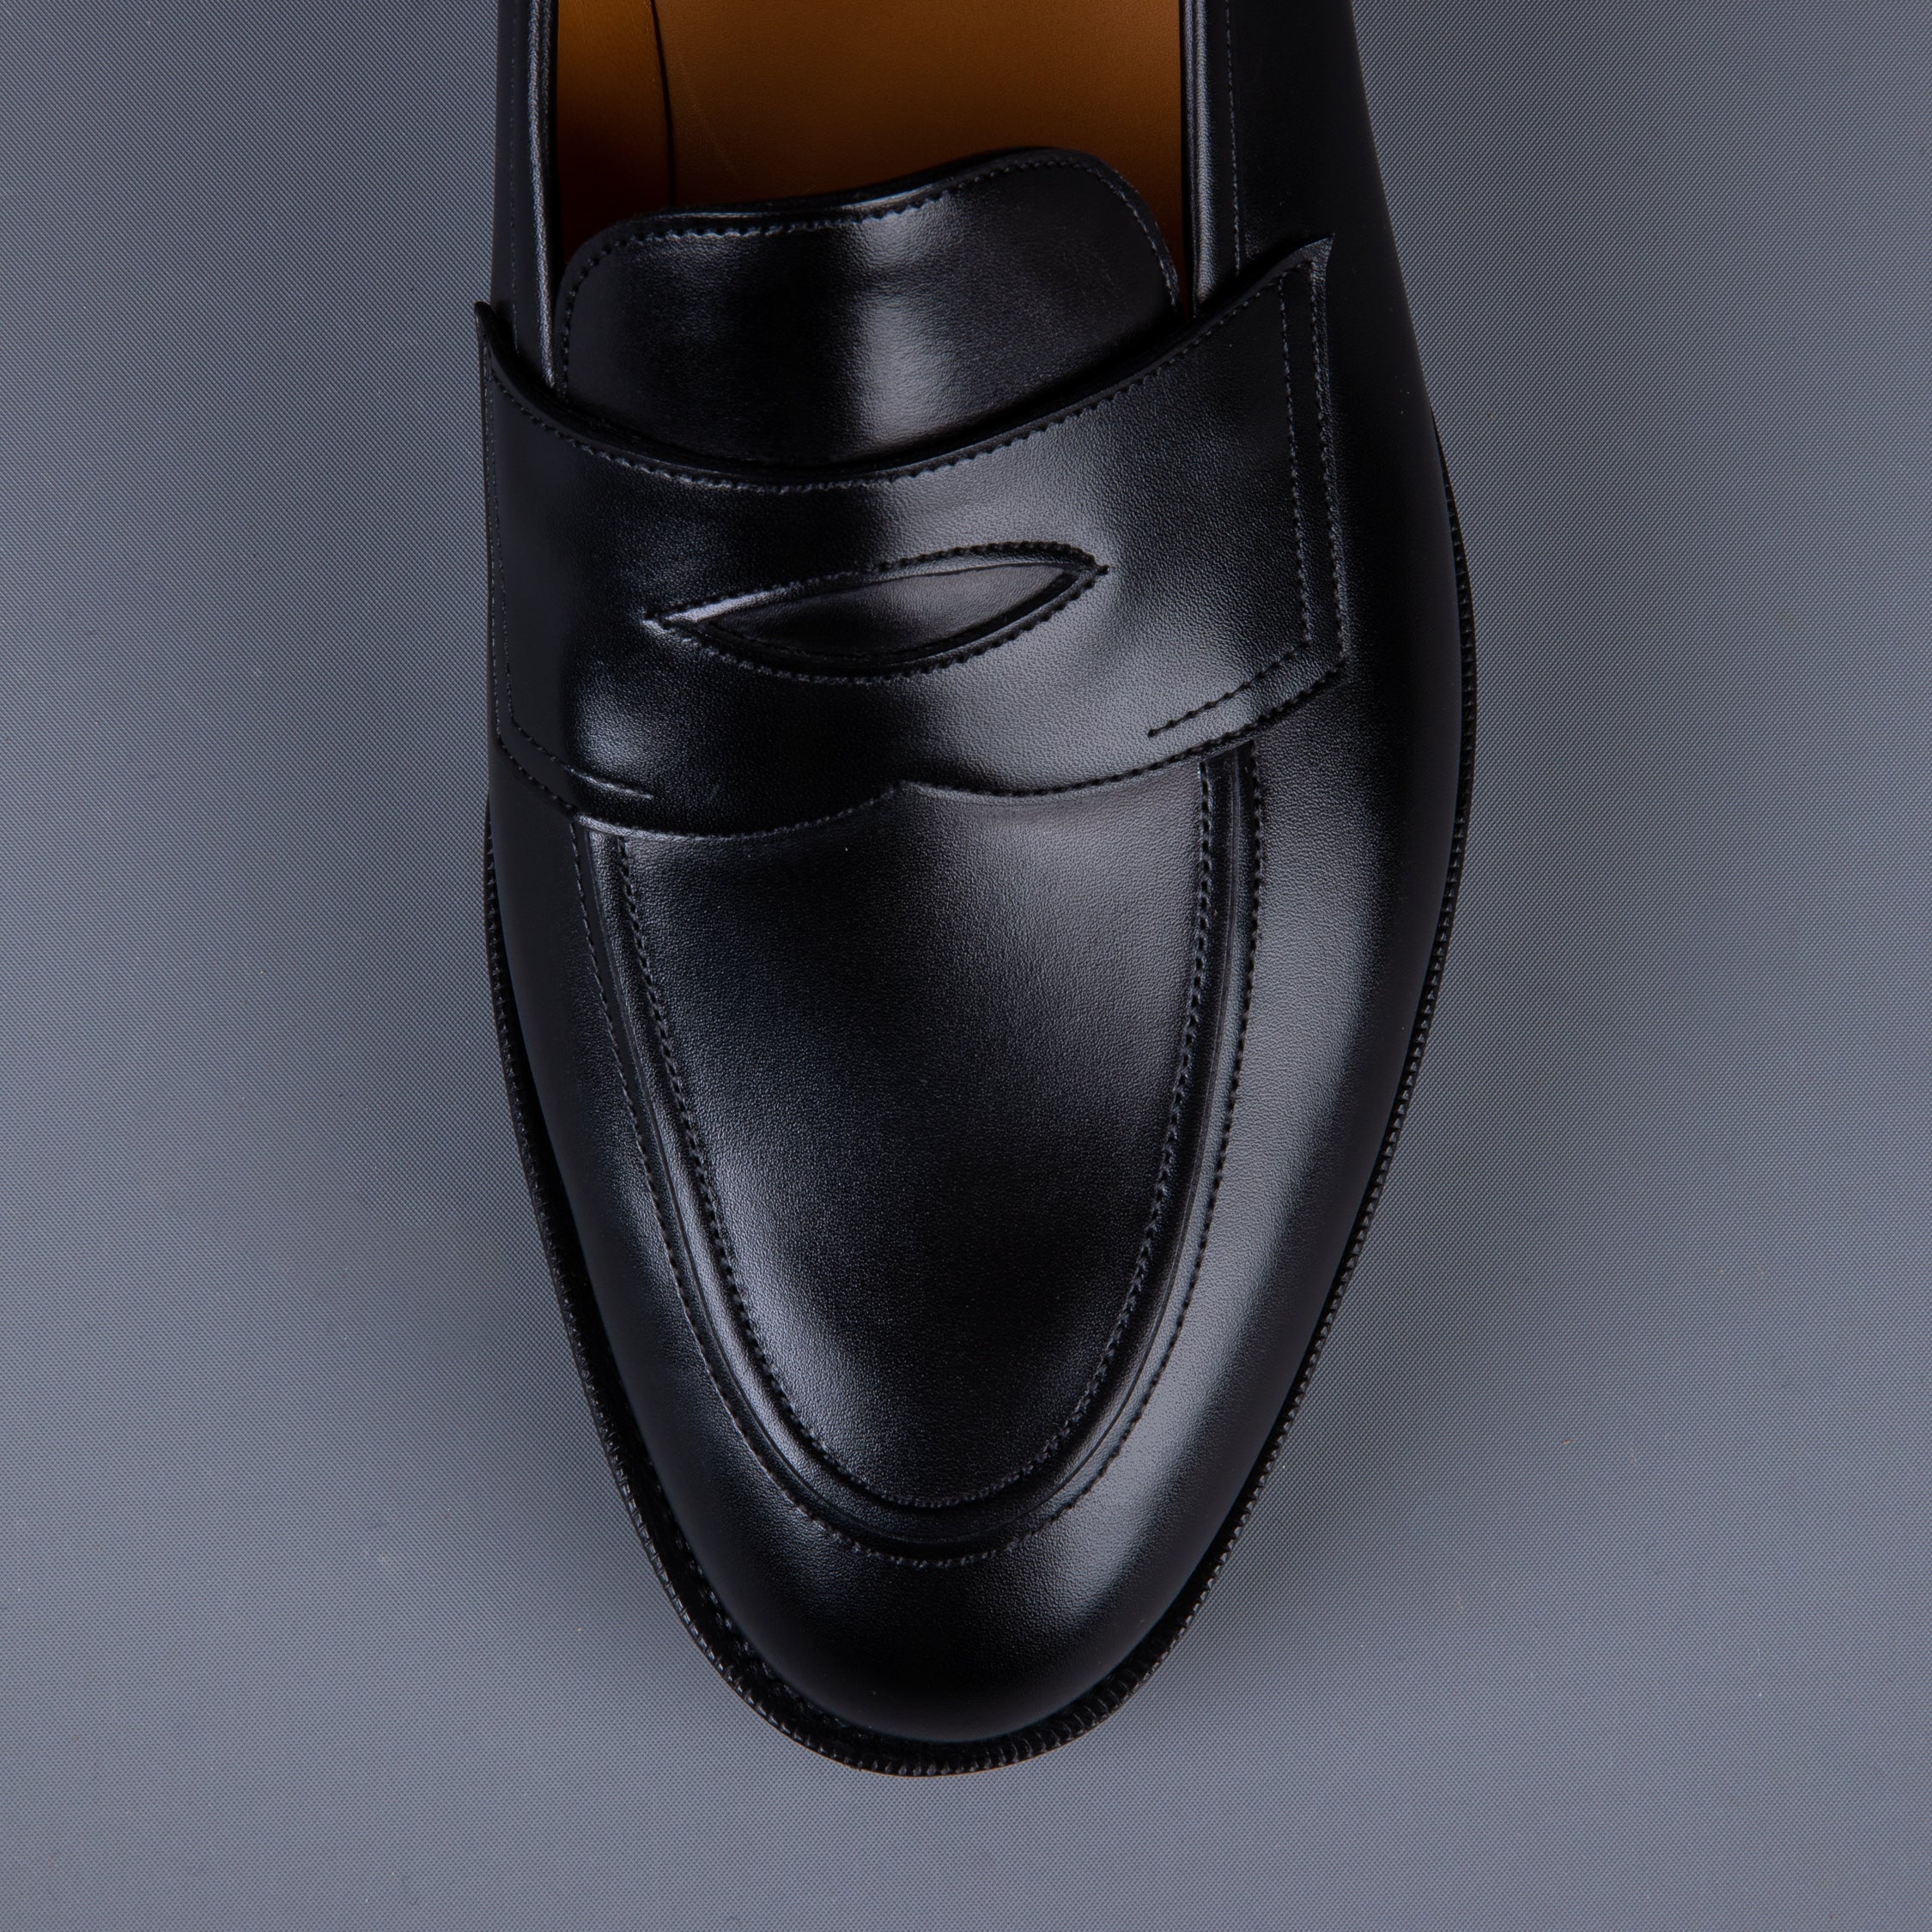 Edward Green Piccadilly in black calf on R1